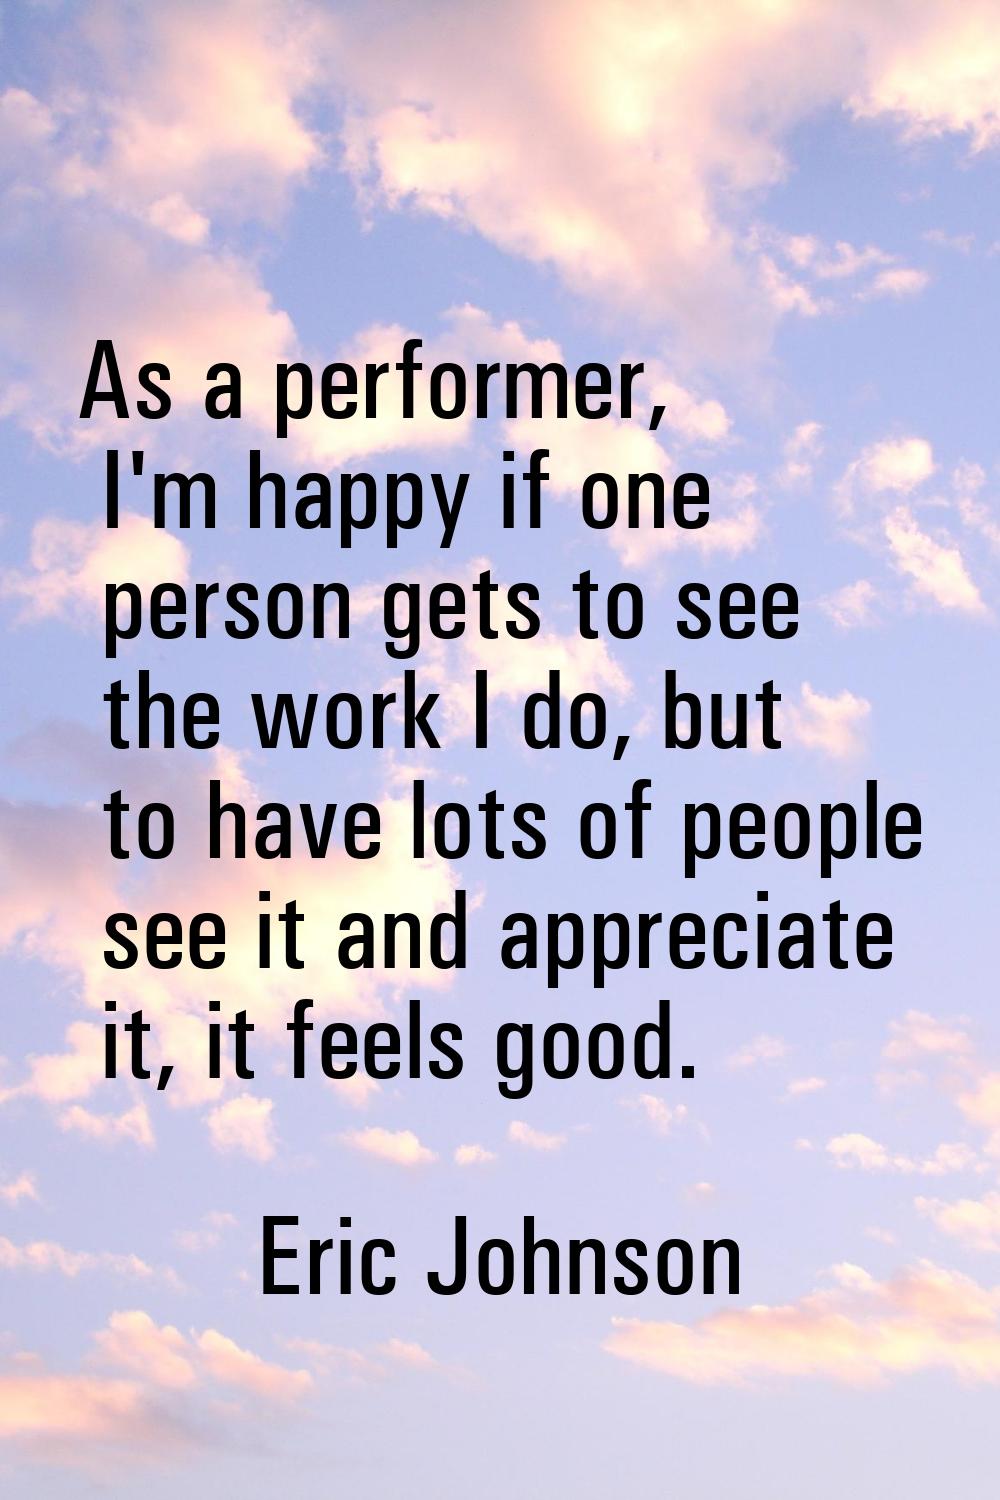 As a performer, I'm happy if one person gets to see the work I do, but to have lots of people see i